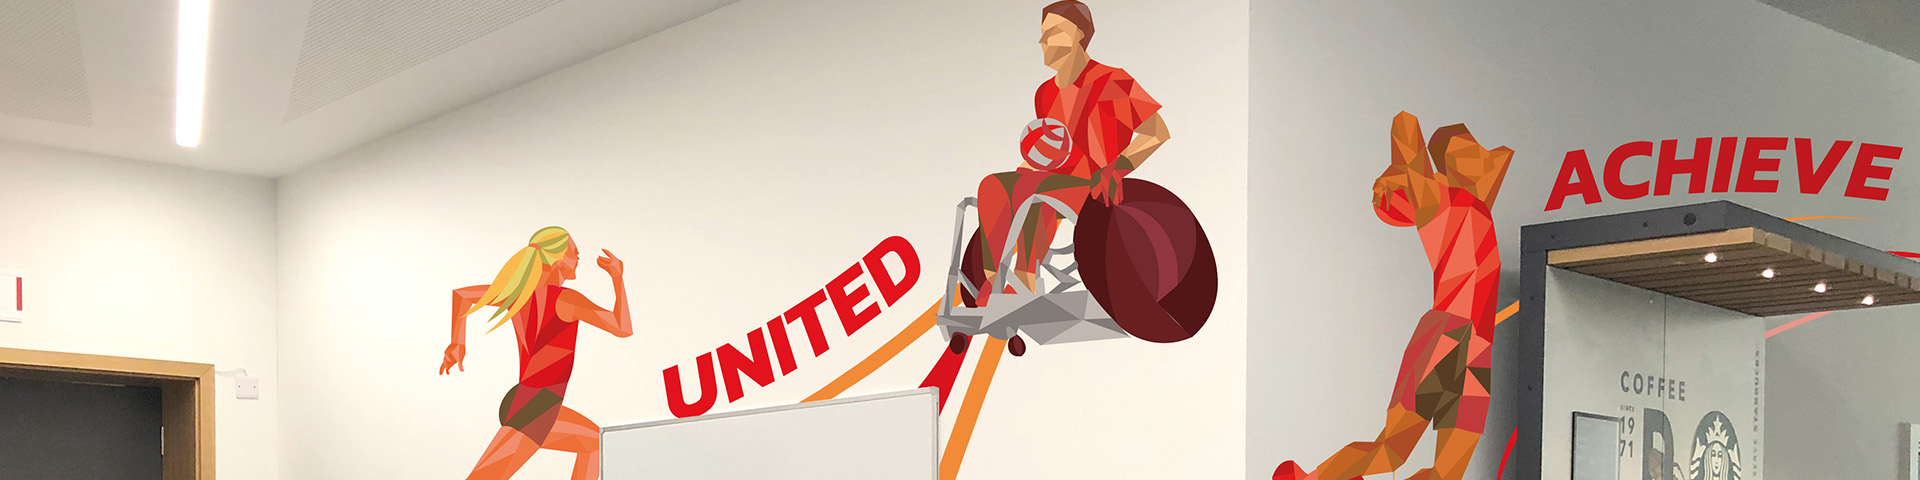 Picture shows a section of the design by Alisha Hutchinson, including the words 'united' and 'achieve' 